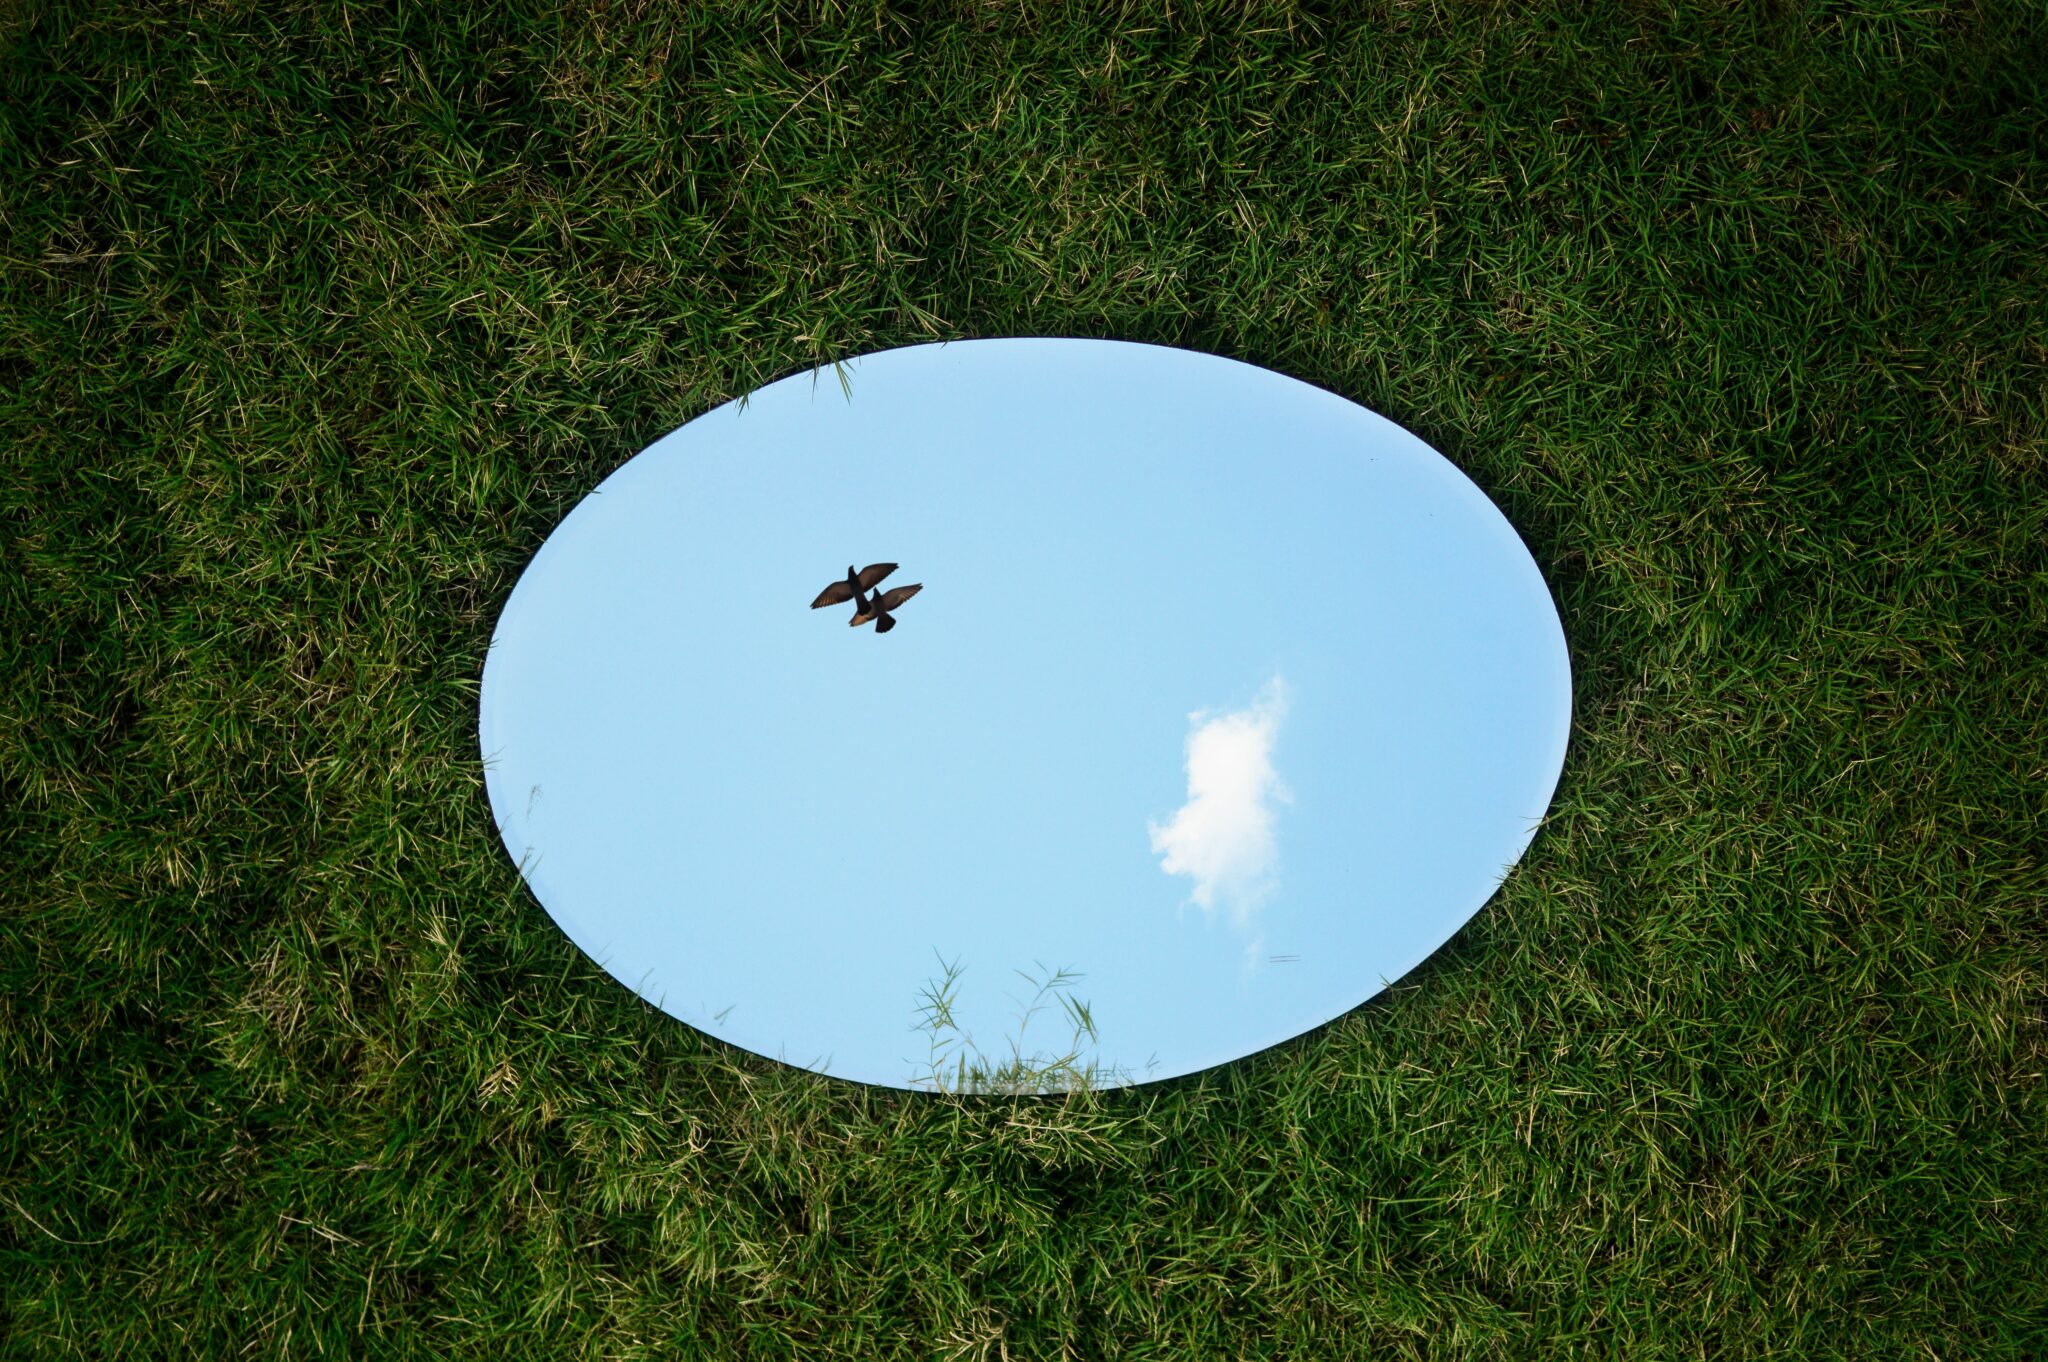 Mirror on the grass reflecting birds flying in the sky